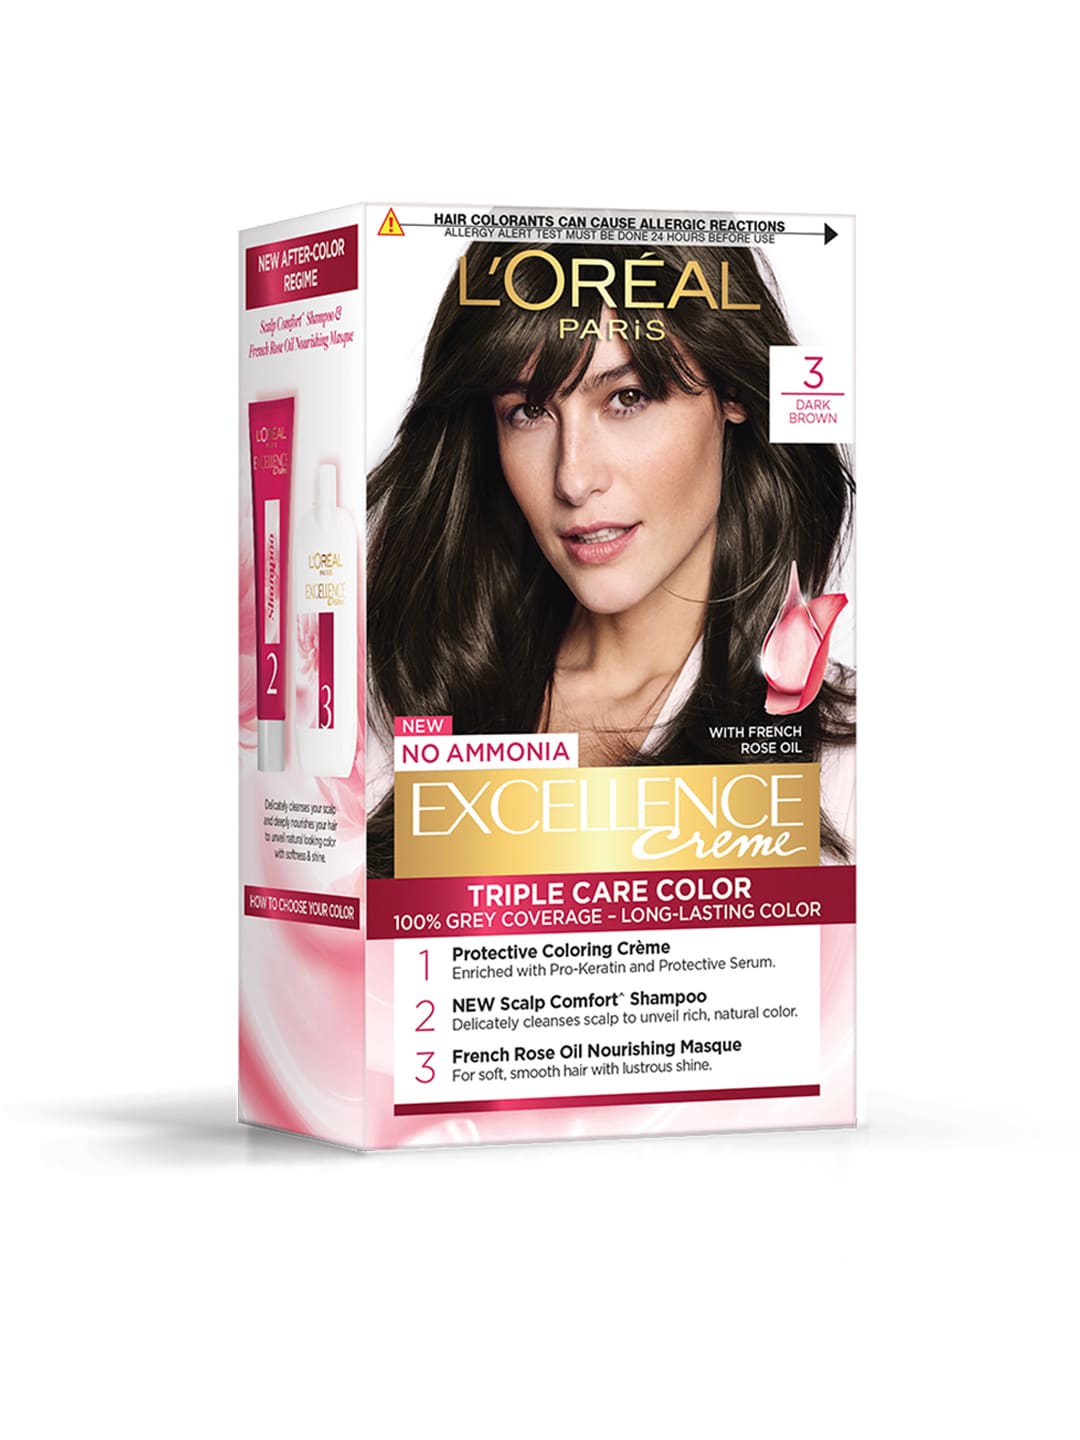 LOreal Paris Excellence Creme Triple Care Hair Color 72 ml+100g - Dark Brown 03 Price in India